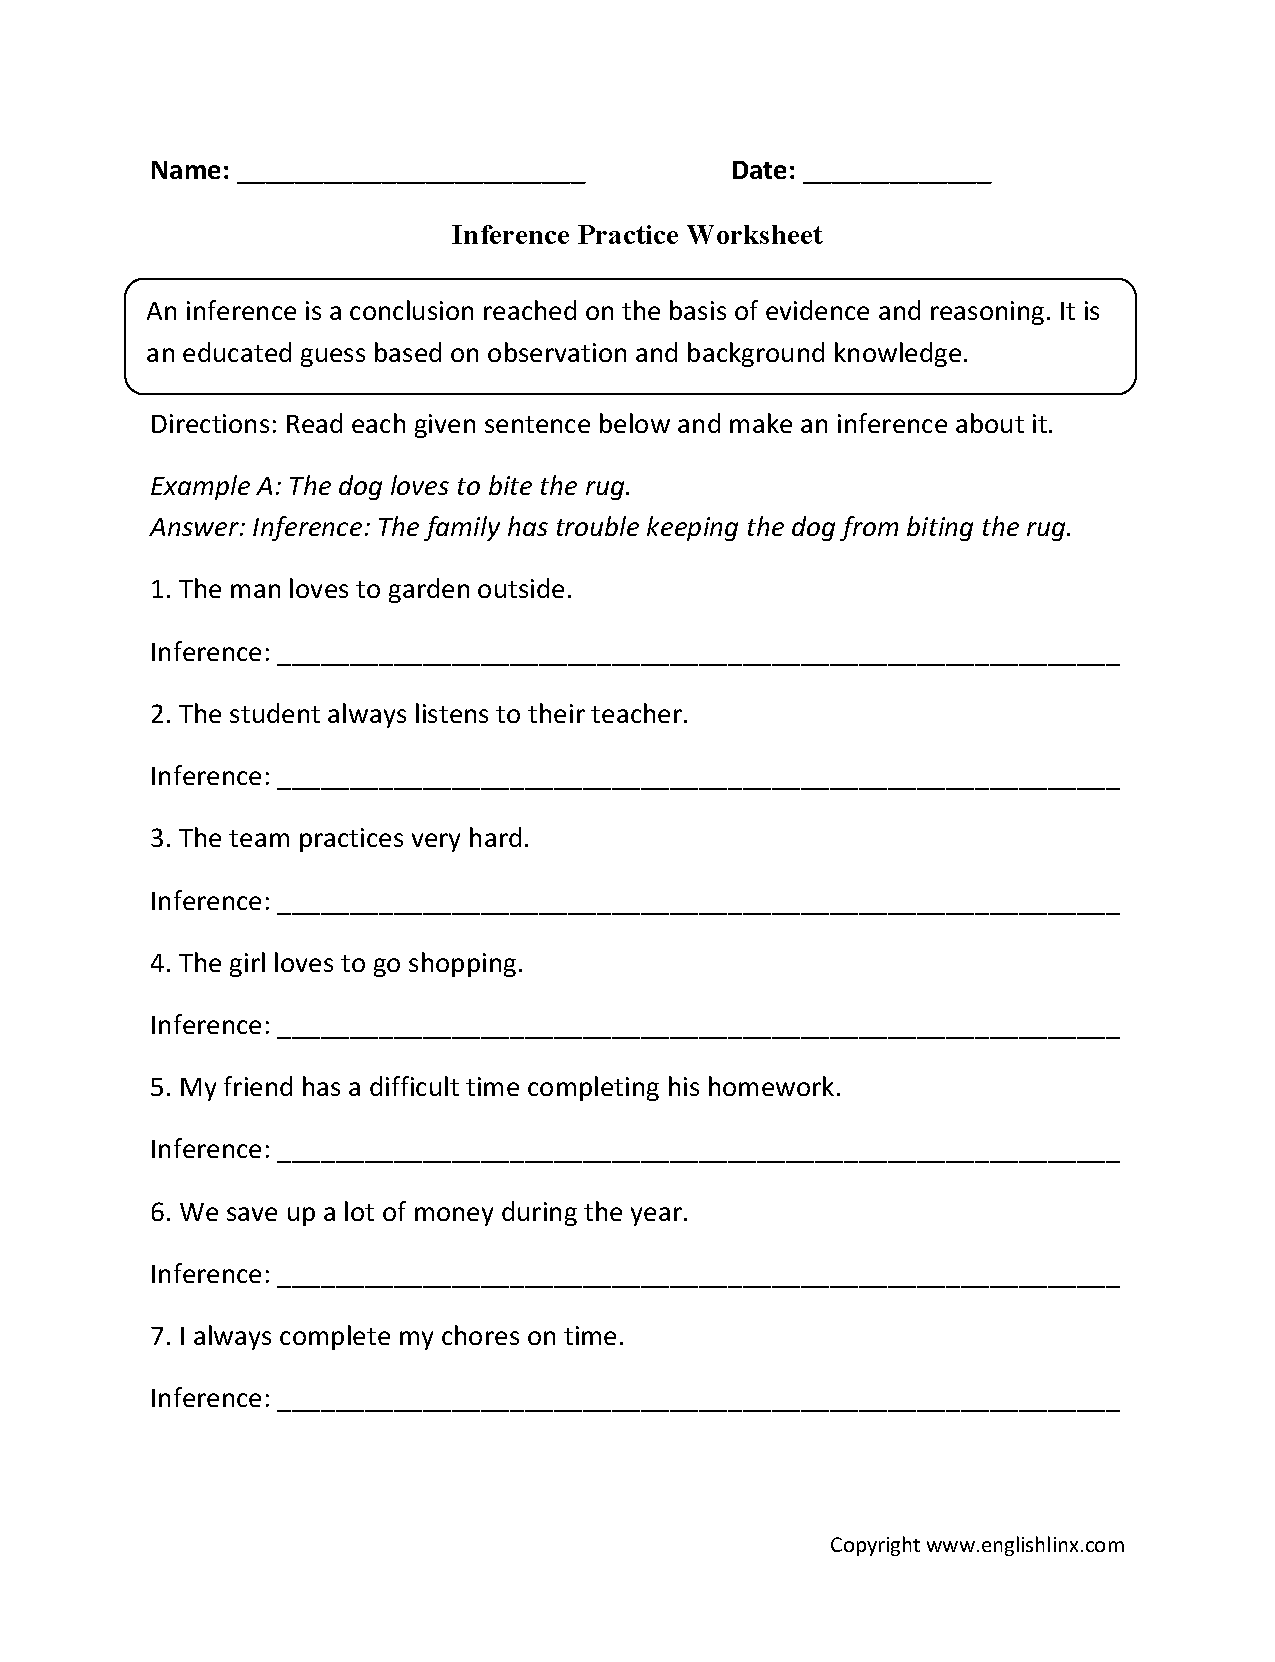 Inference Practice Worksheet